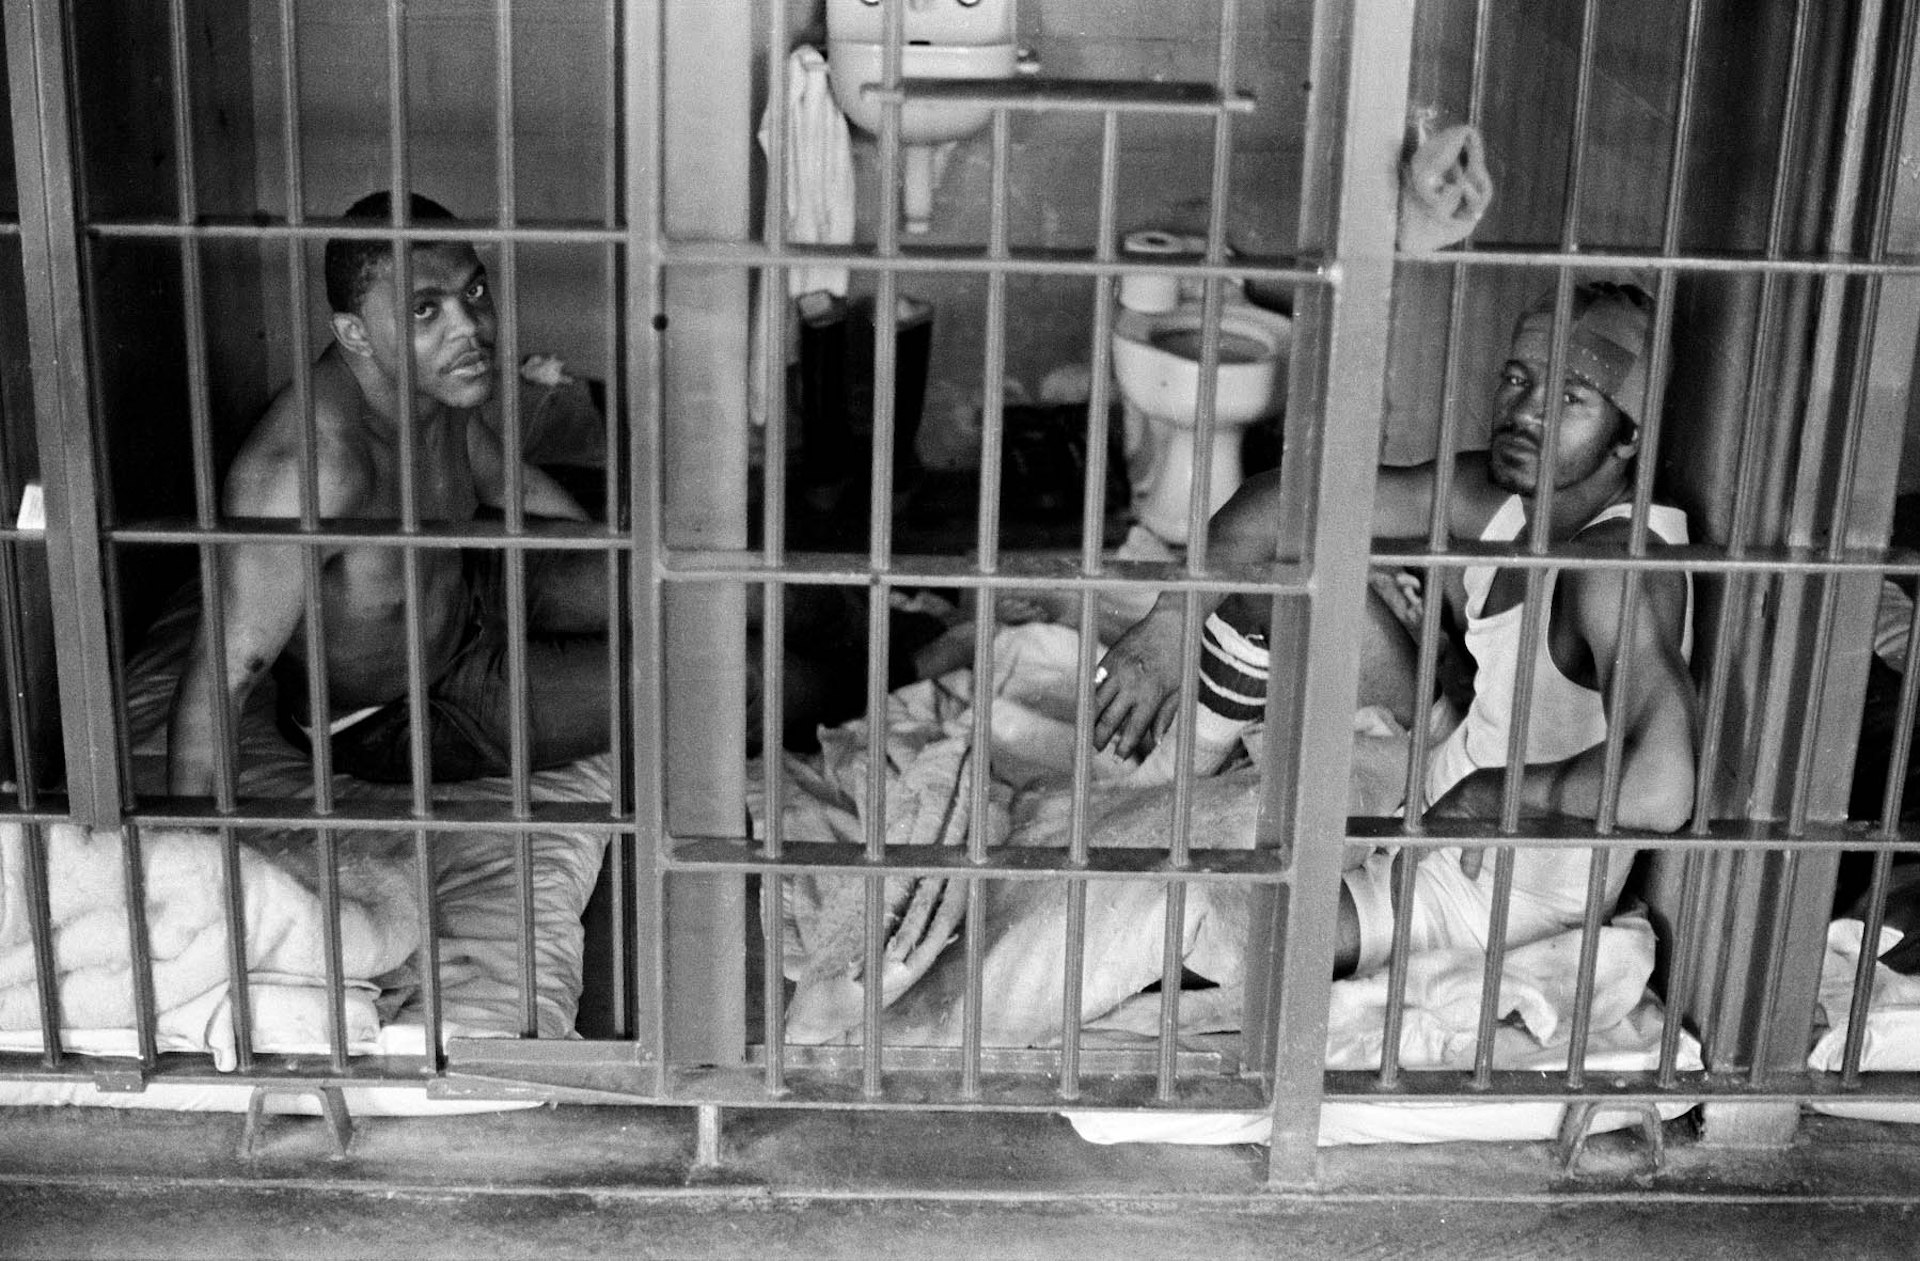 Keith Calhoun. TWO TO A SIX-BY-EIGHT-FOOT CELL AT ANGOLA PRISON, 1980.